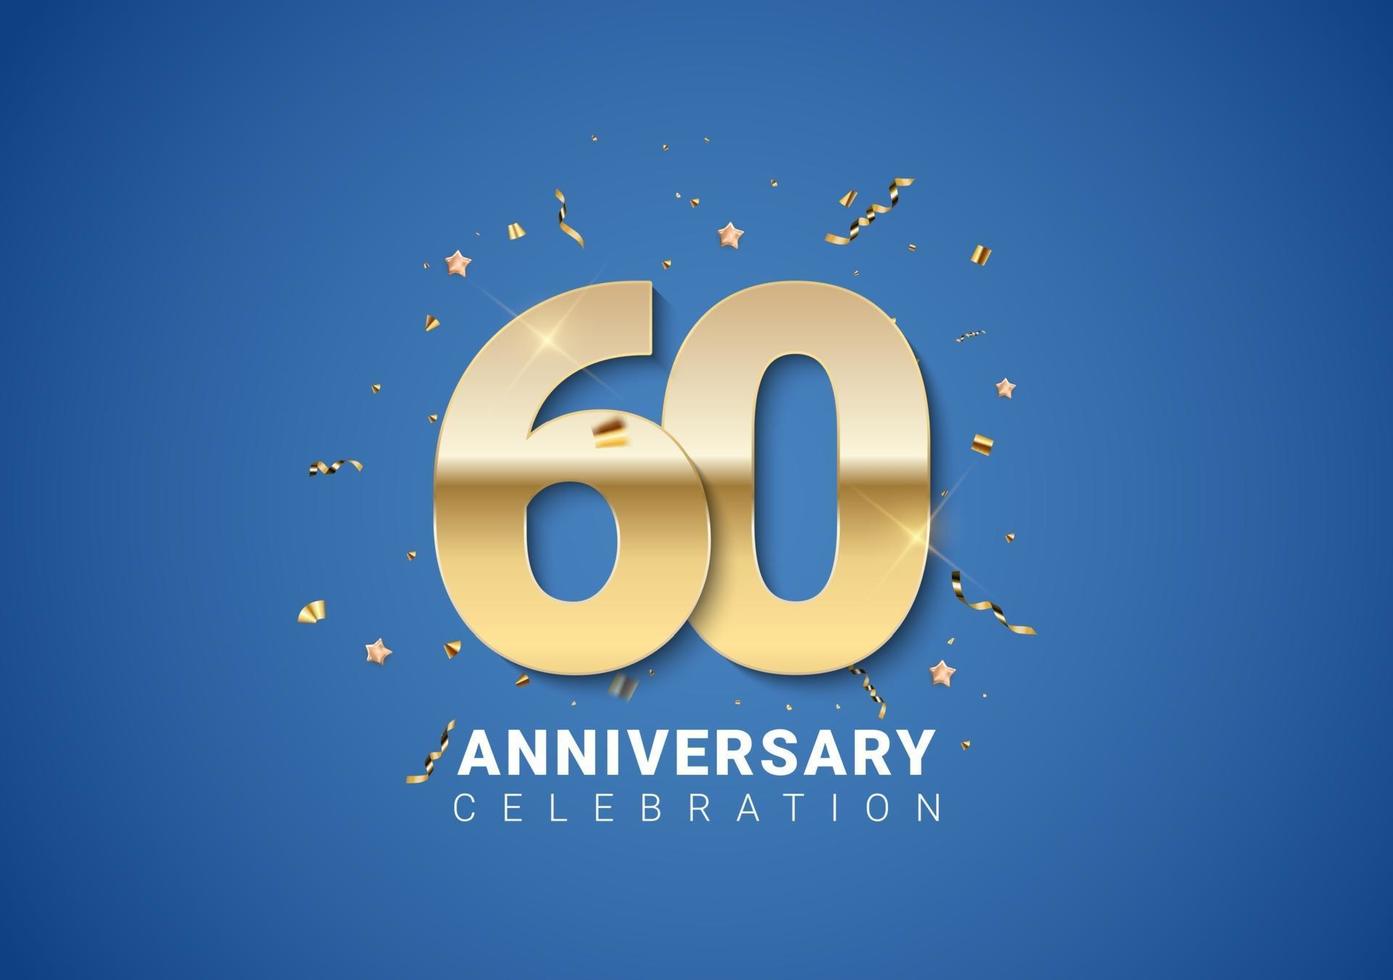 60 anniversary background with golden numbers, confetti, stars vector